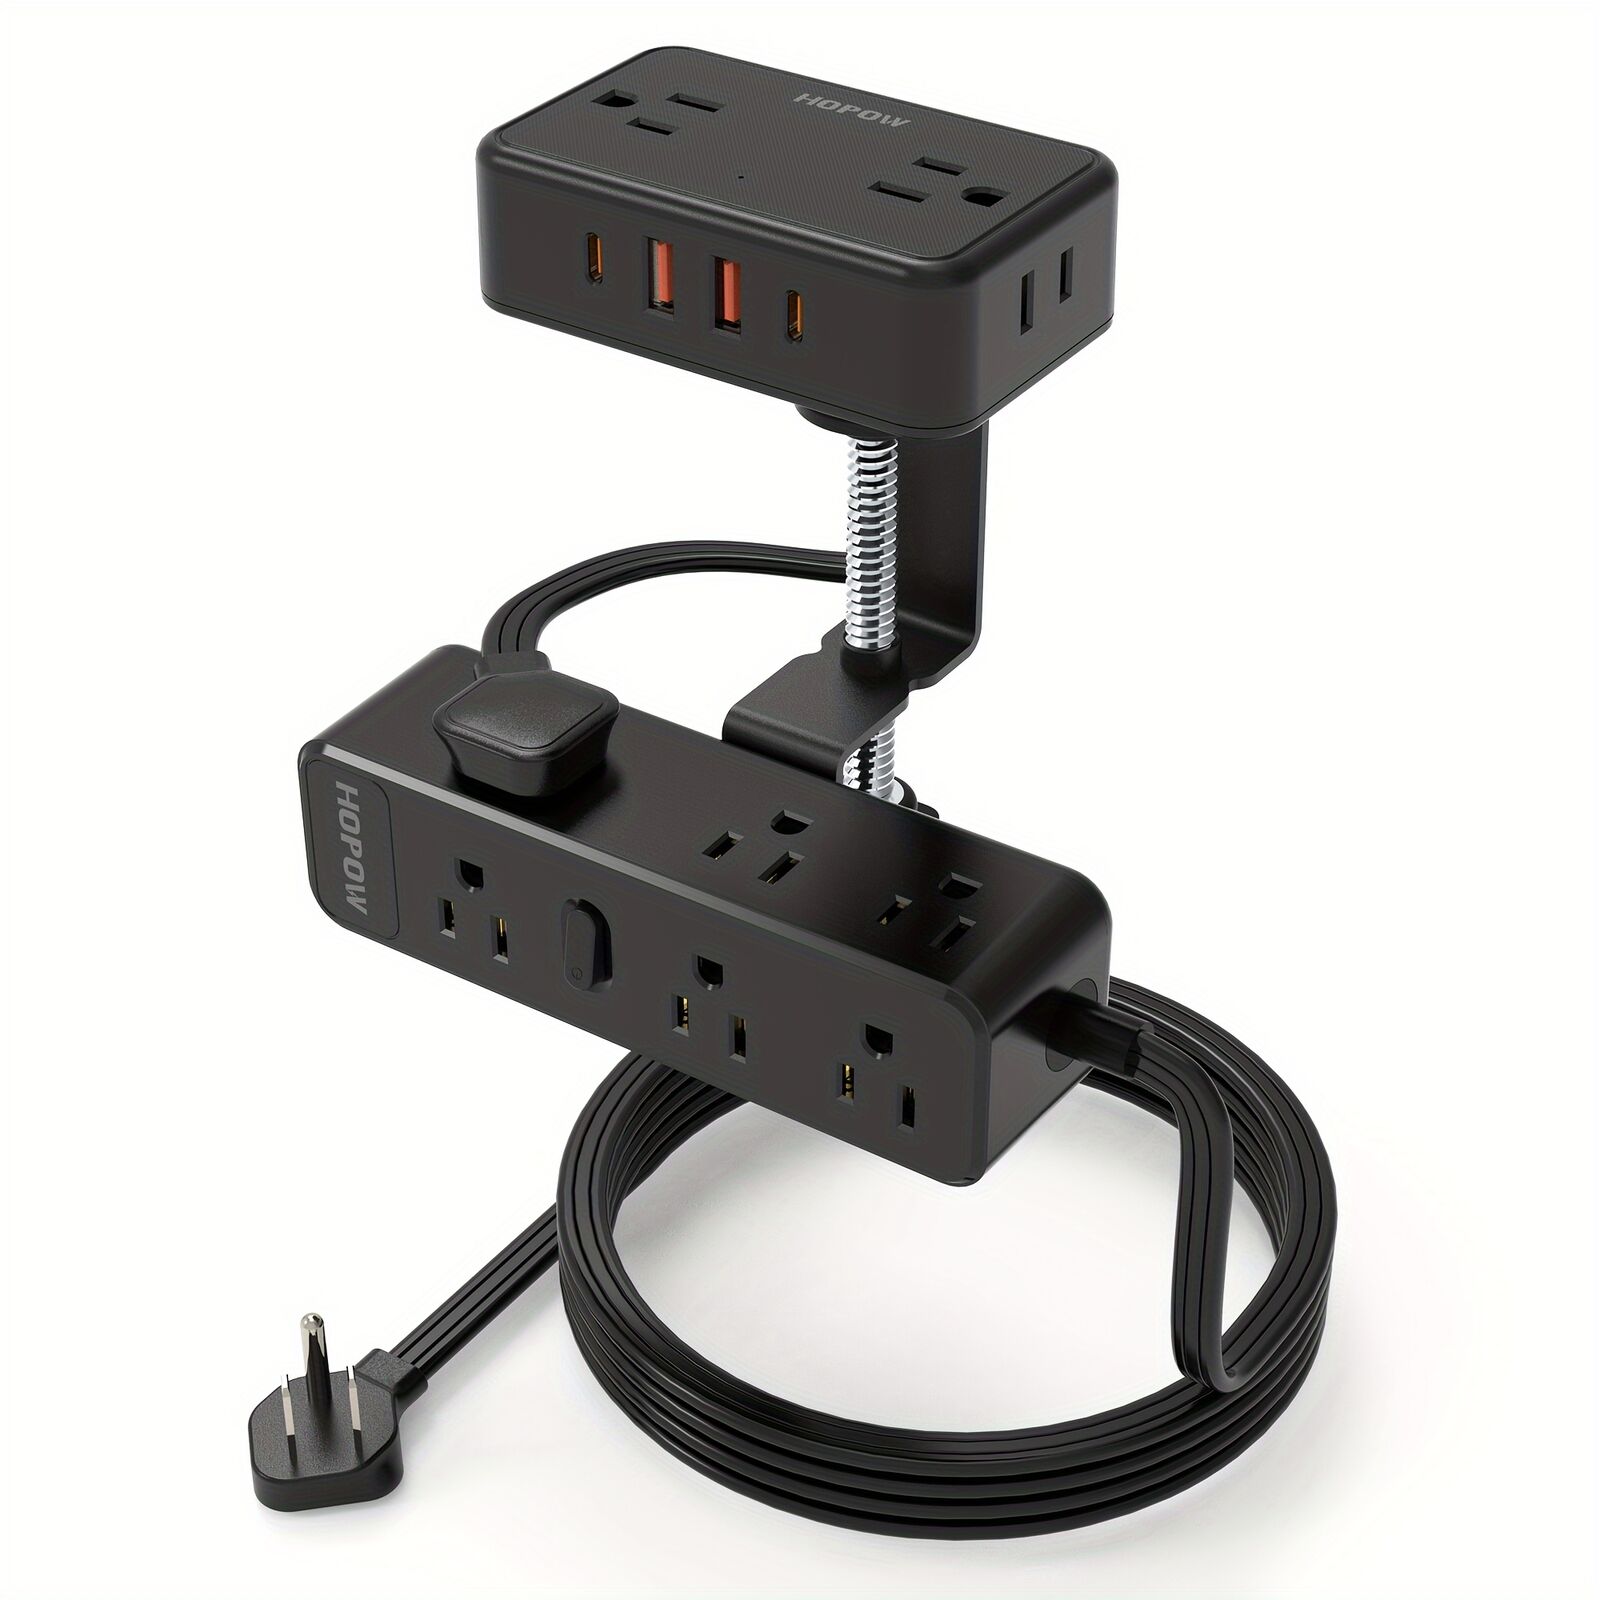 CLOVER Desk Clamp Power Strip, with 13 Outlets 2 USB-A Ports And 2USB-C Ports,